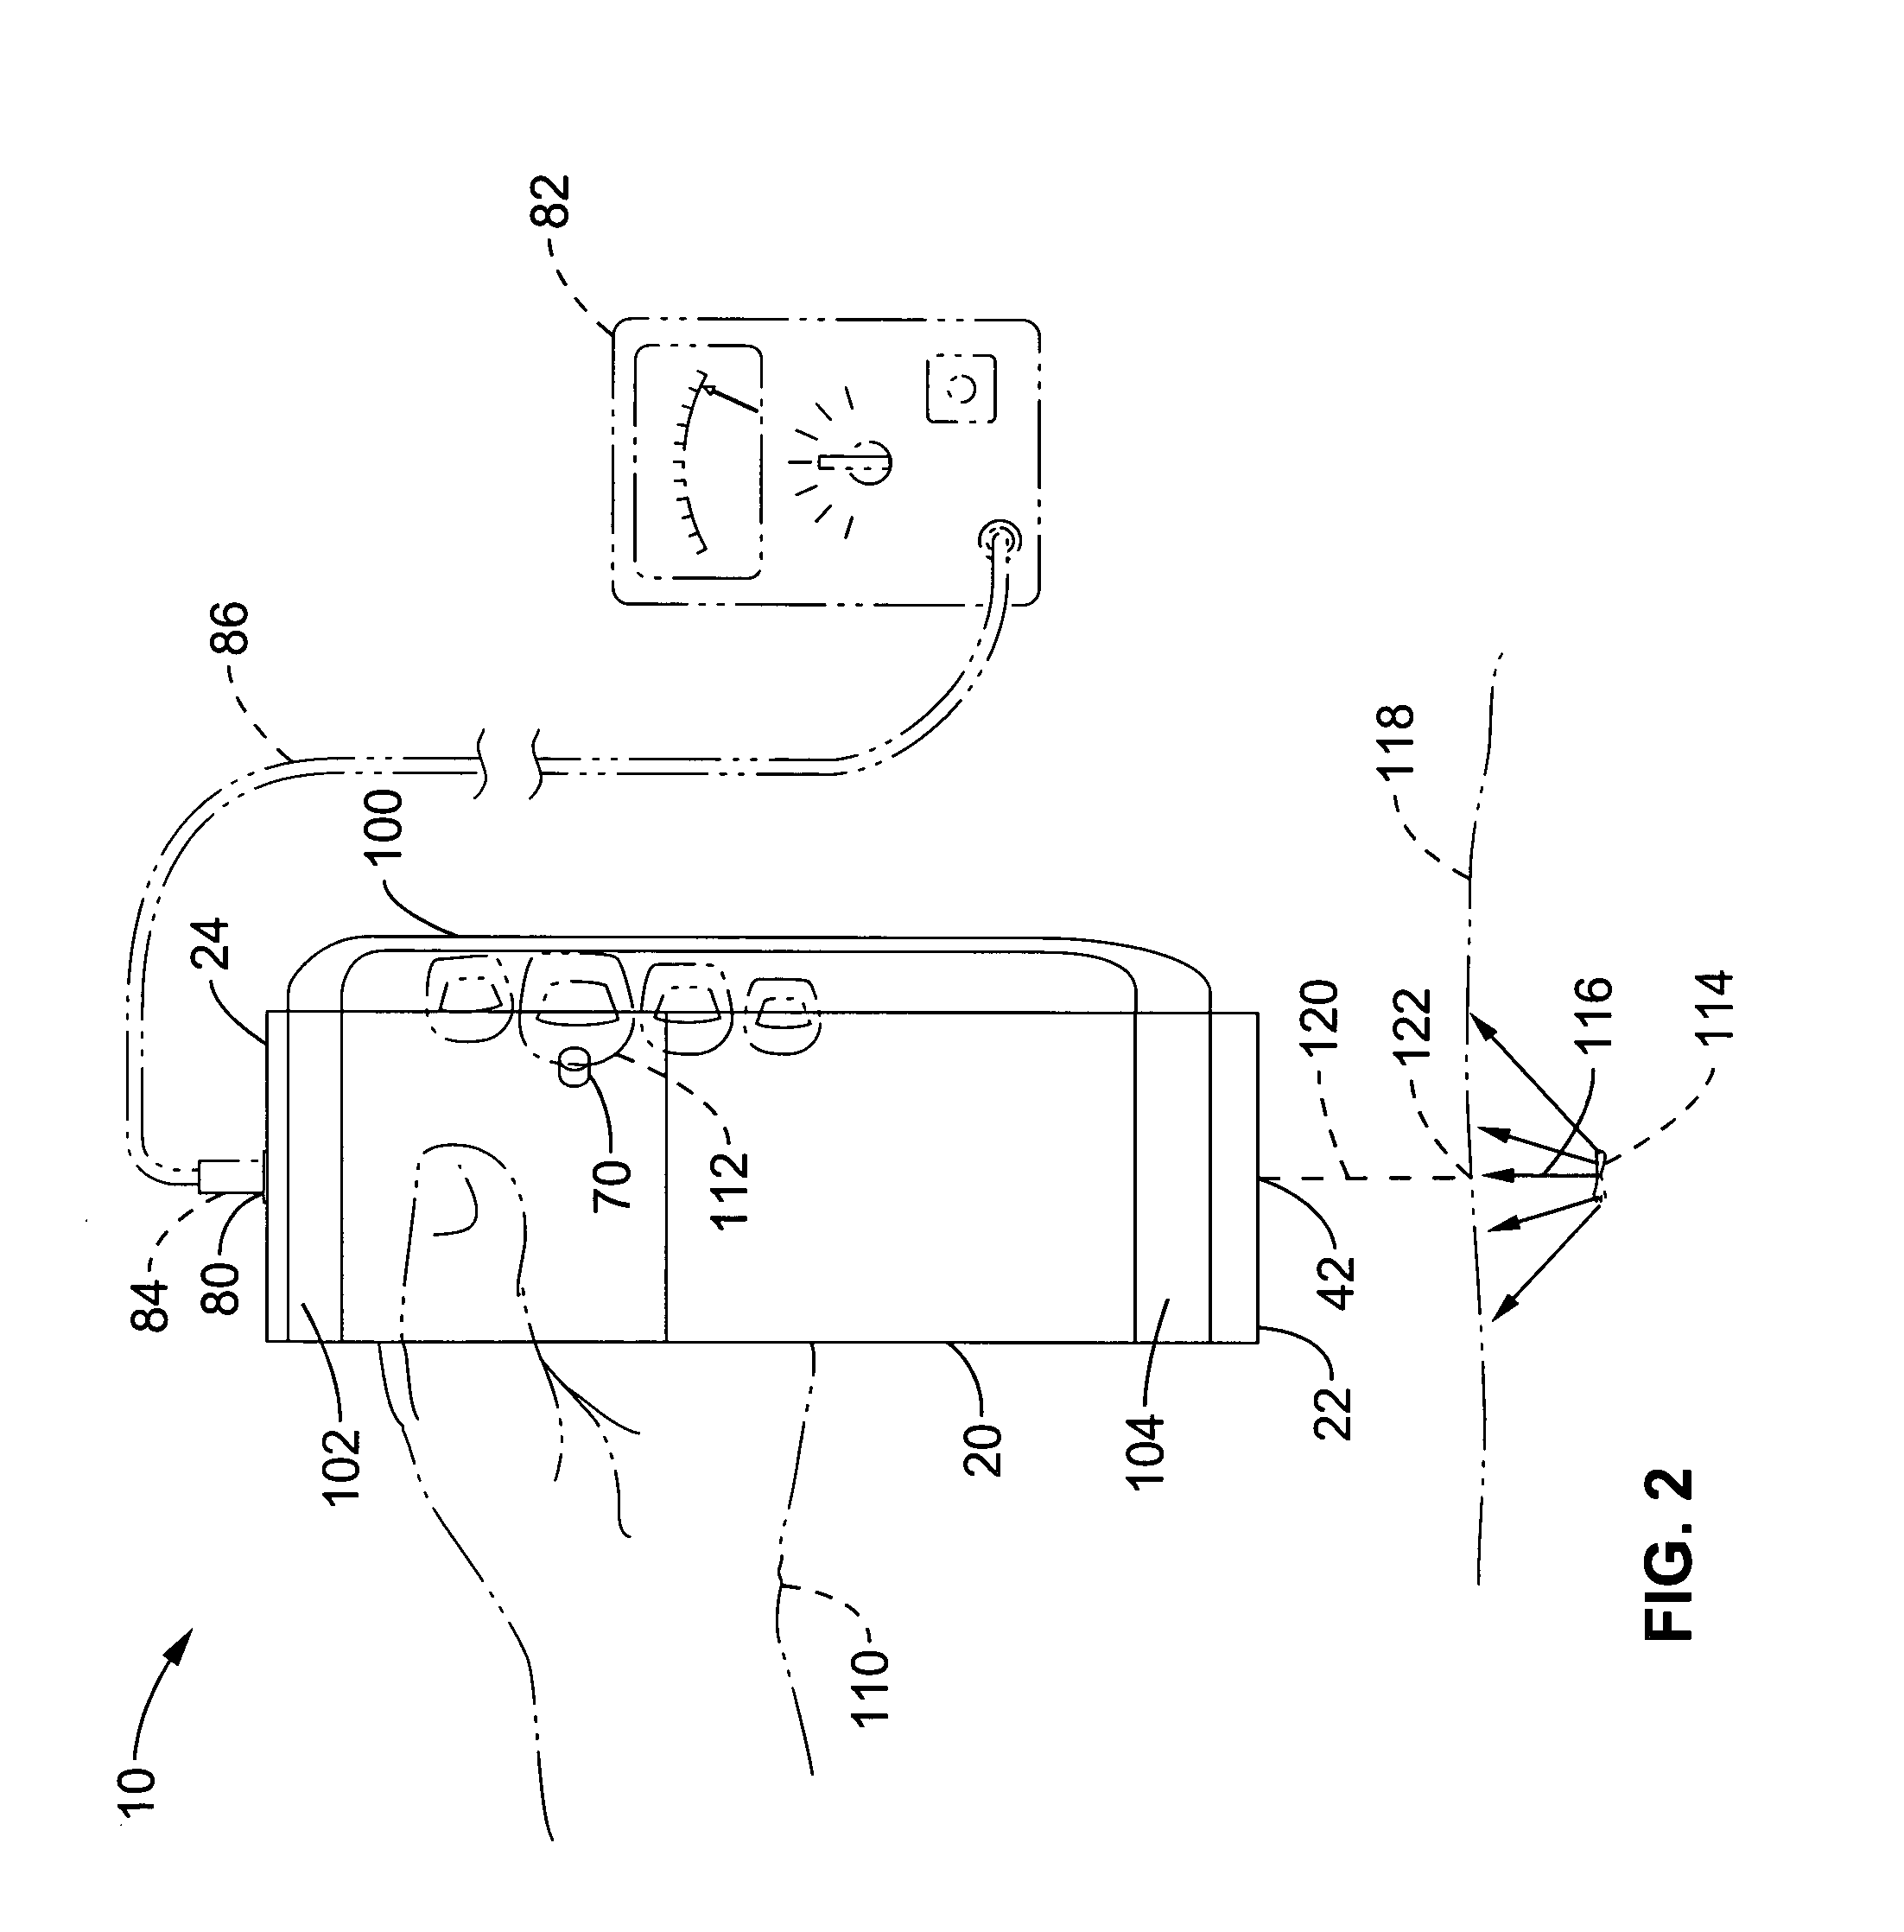 Probe apparatus with laser guiding for locating a source of radioactivity